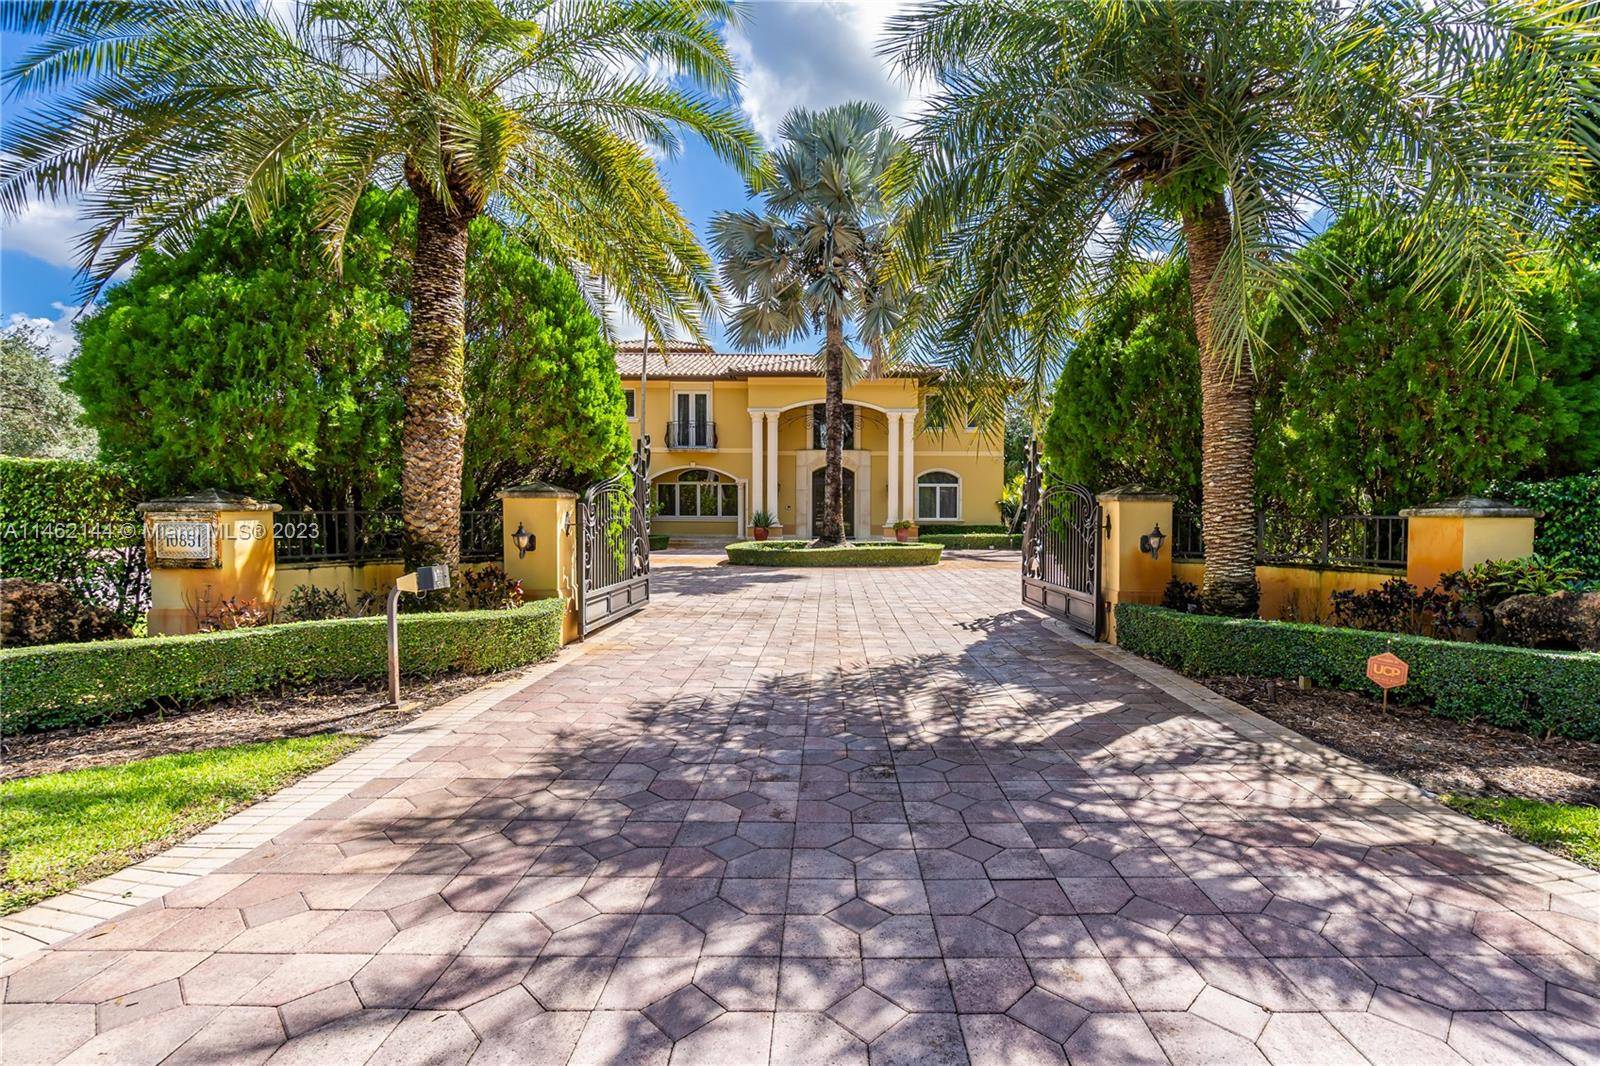 Situated in Pinecrest, this opulent home spans nearly an acre, offering 6 bedrooms, 6.